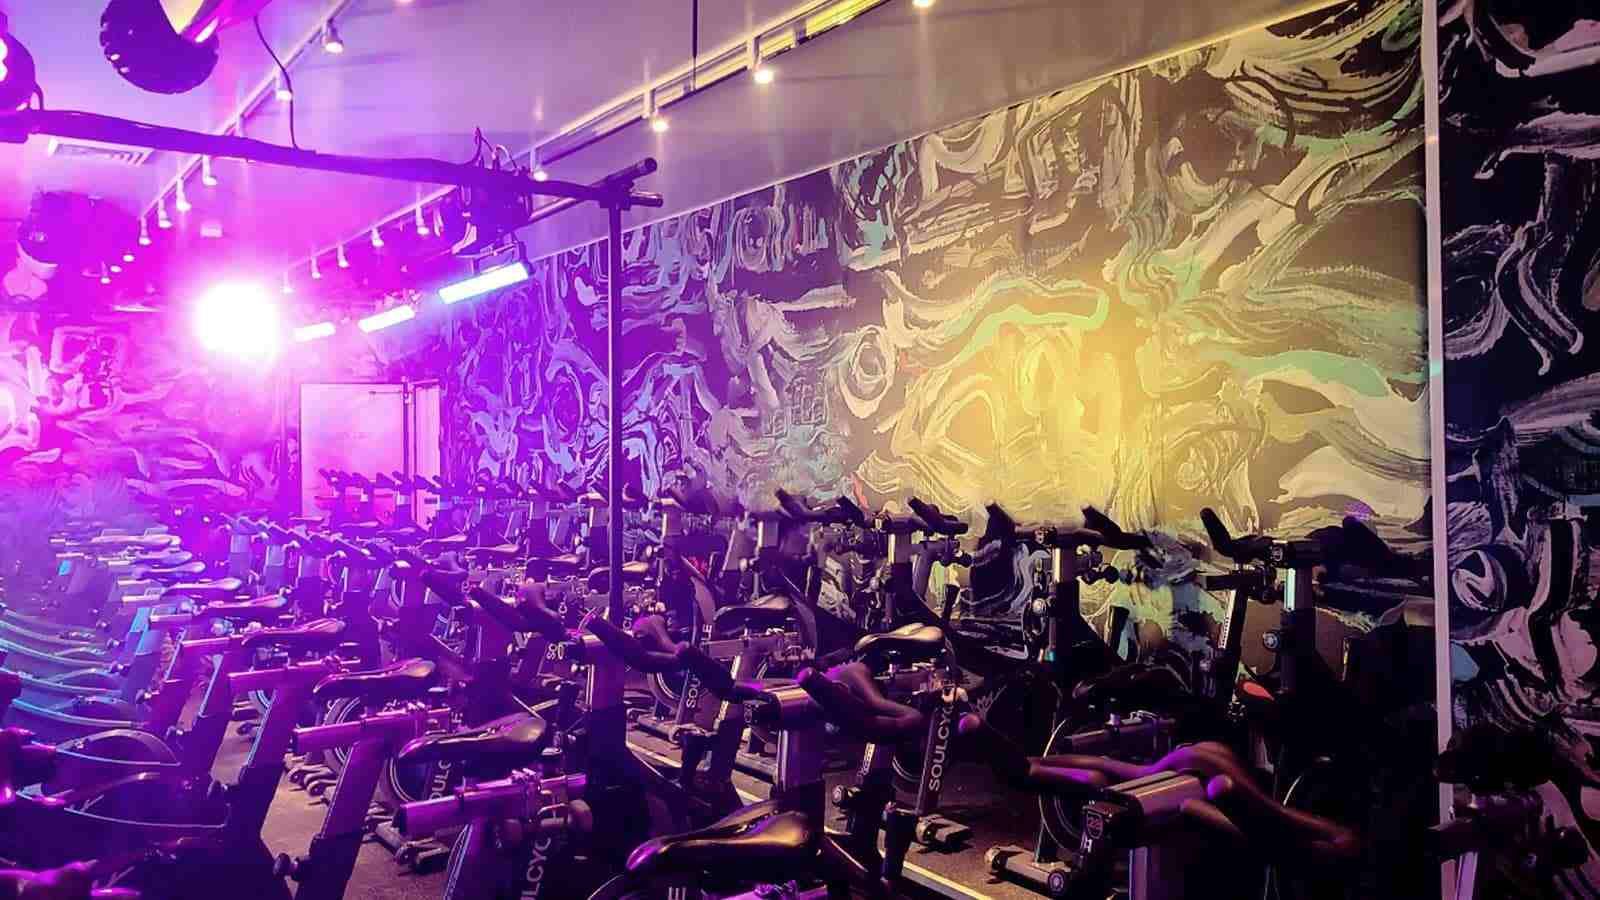 Bilt x Soulcycle collaboration Event wall graphics